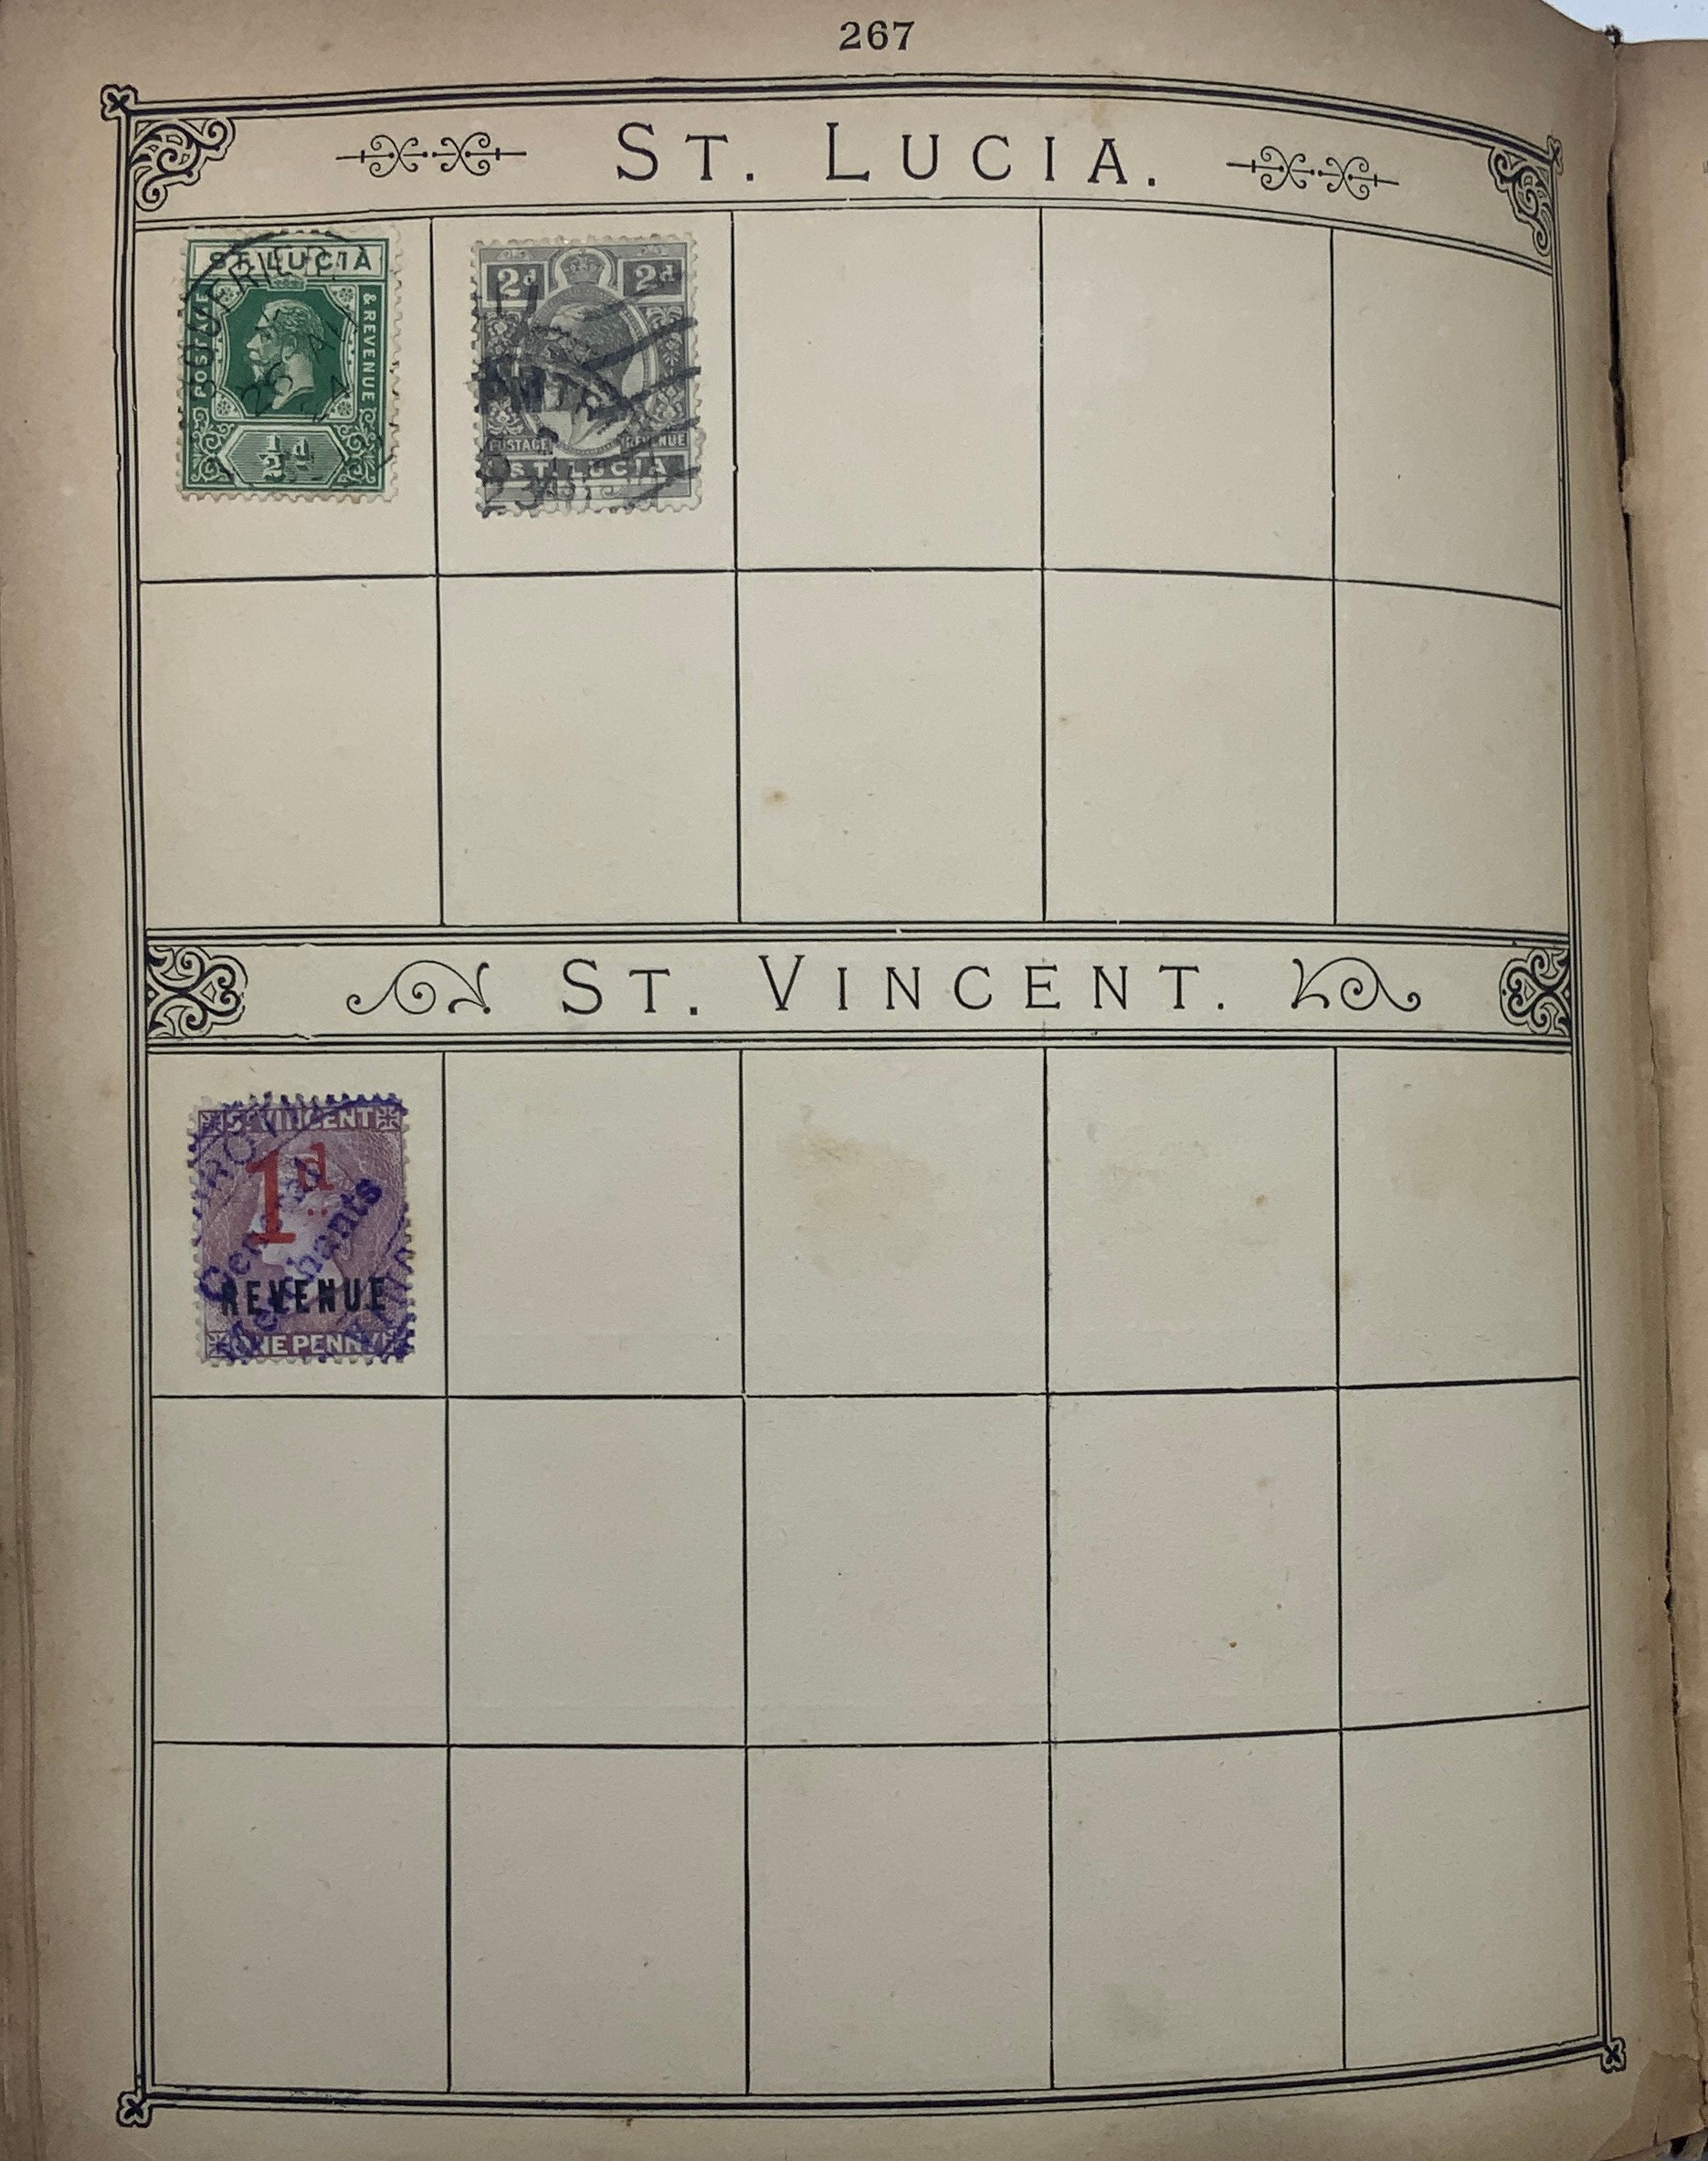 SELECTION OF VARIOUS STAMPS IN ALBUM, SOME LOOSE PAGES - Image 92 of 92